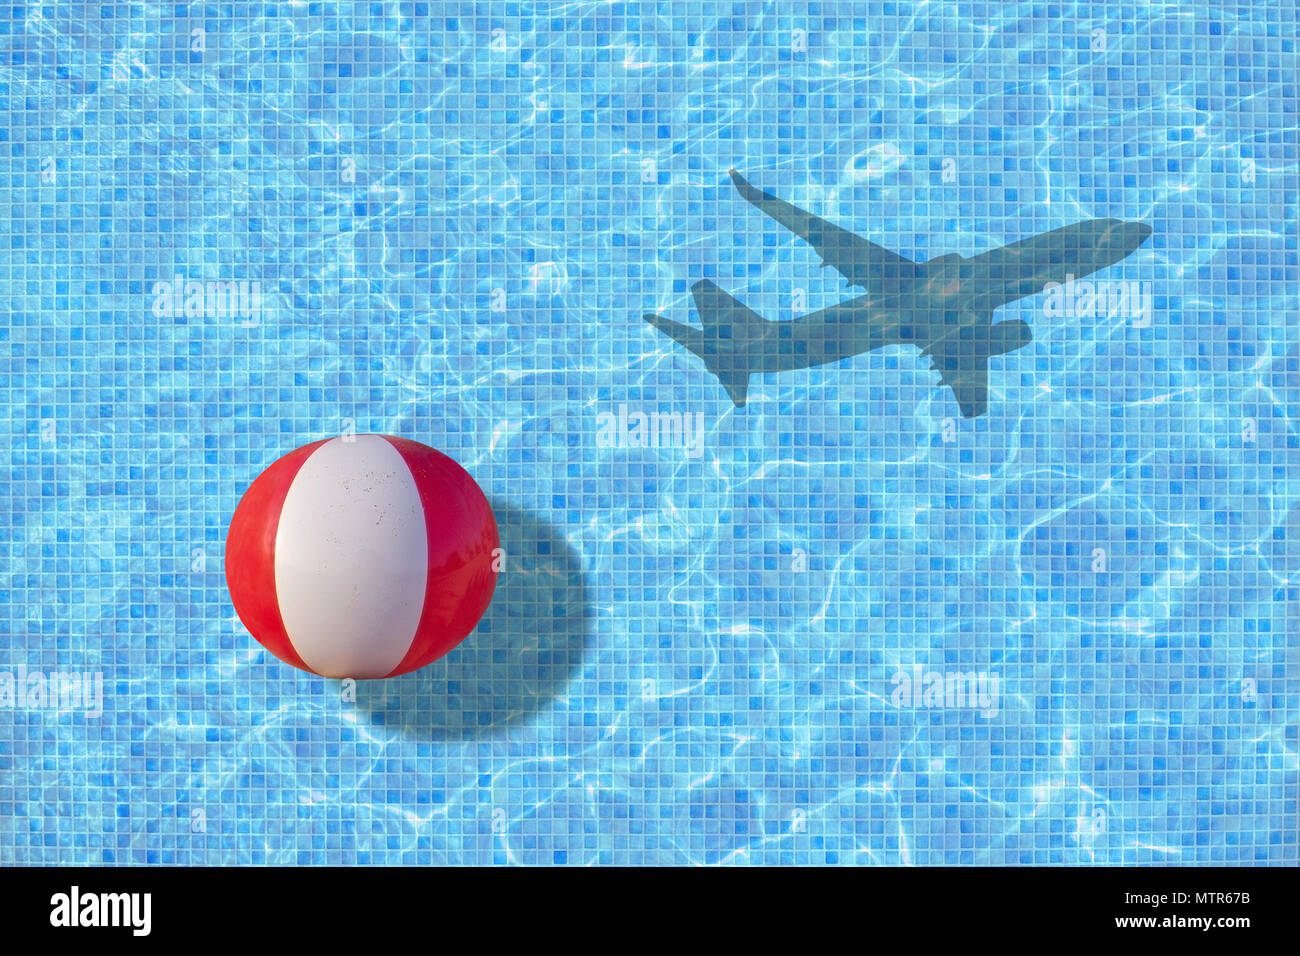 Vacation ends ball is left in pool and shadow of leaving airplane takes off concept for back to work, school start for example. Stock Photo